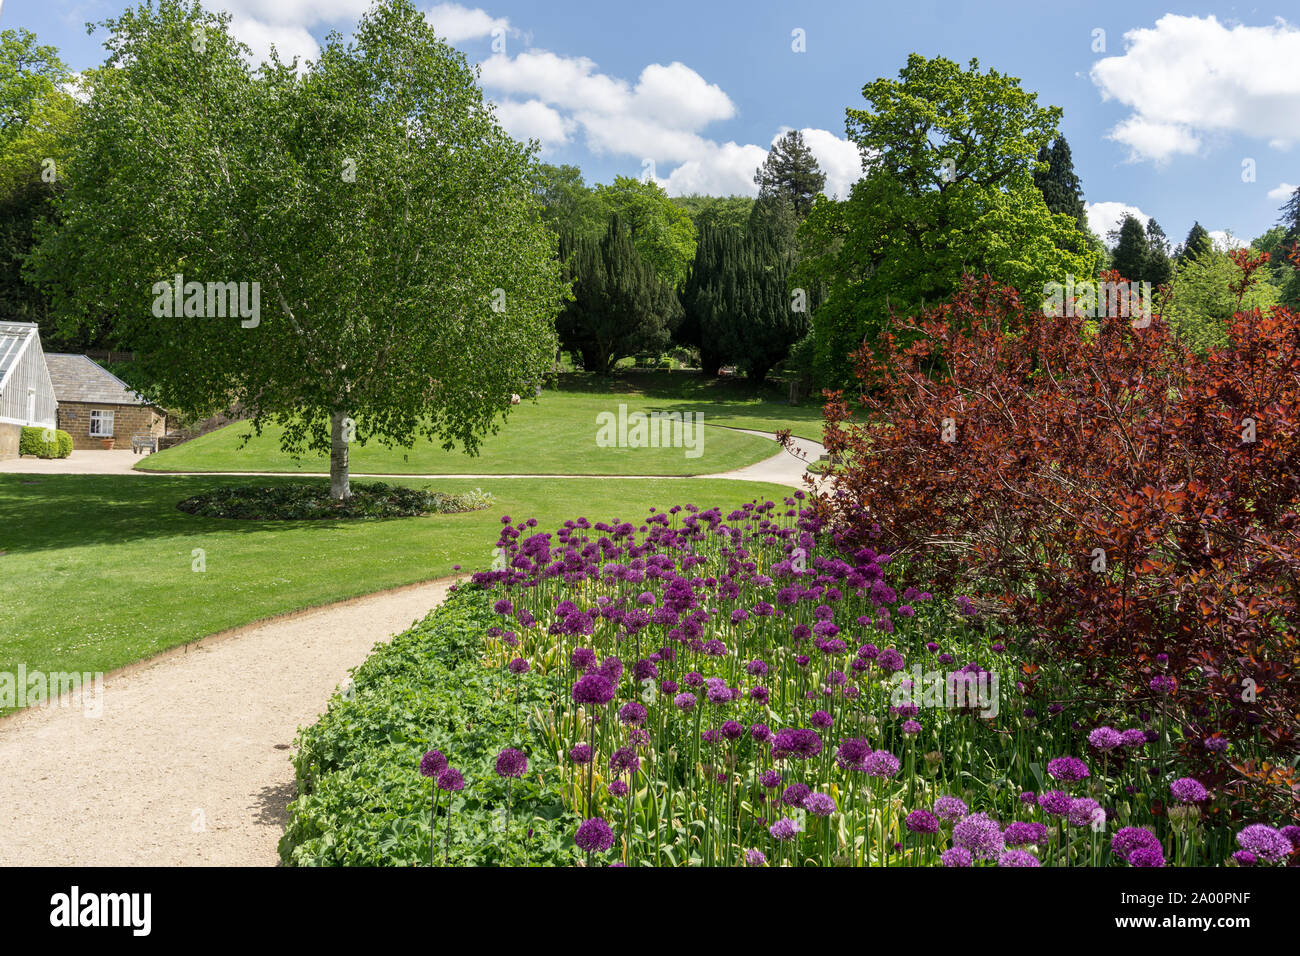 The gardens in Summer, Chatsworth House, an English stately home, Derbyshire, UK Stock Photo